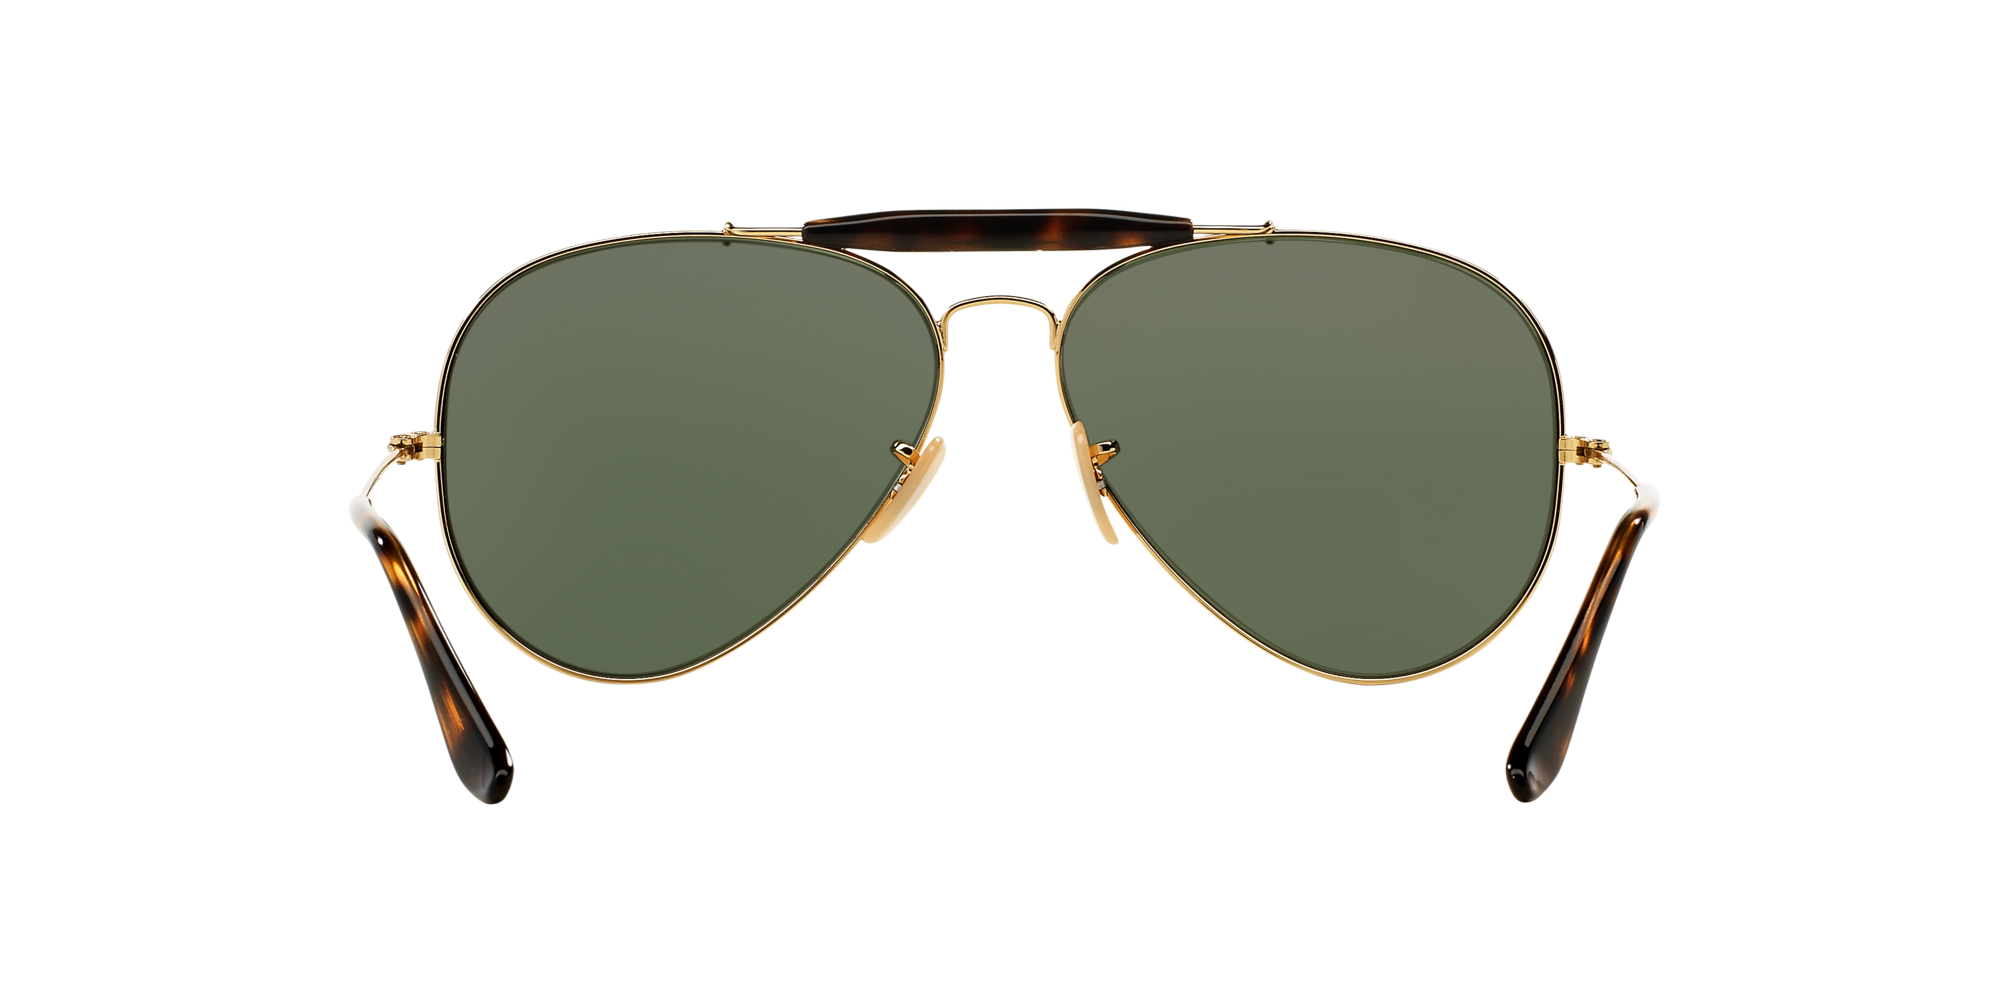 RAY-BAN OUTDOORSMAN II RB 3029 181, , hi-res image number 3